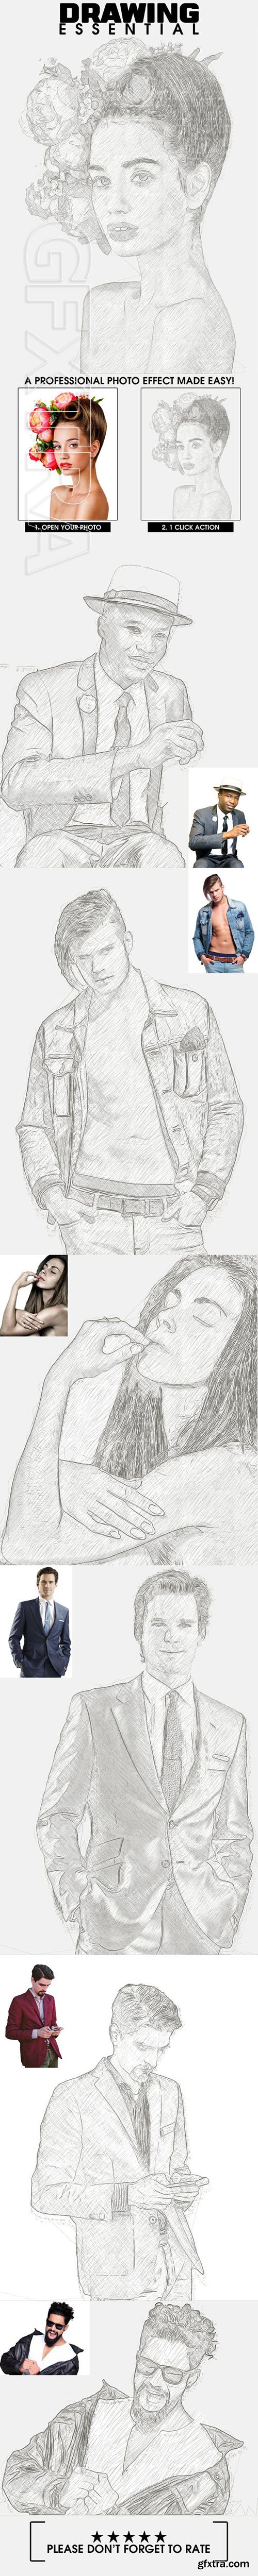 GraphicRiver - Drawing Essential Photoshop Action 23112000